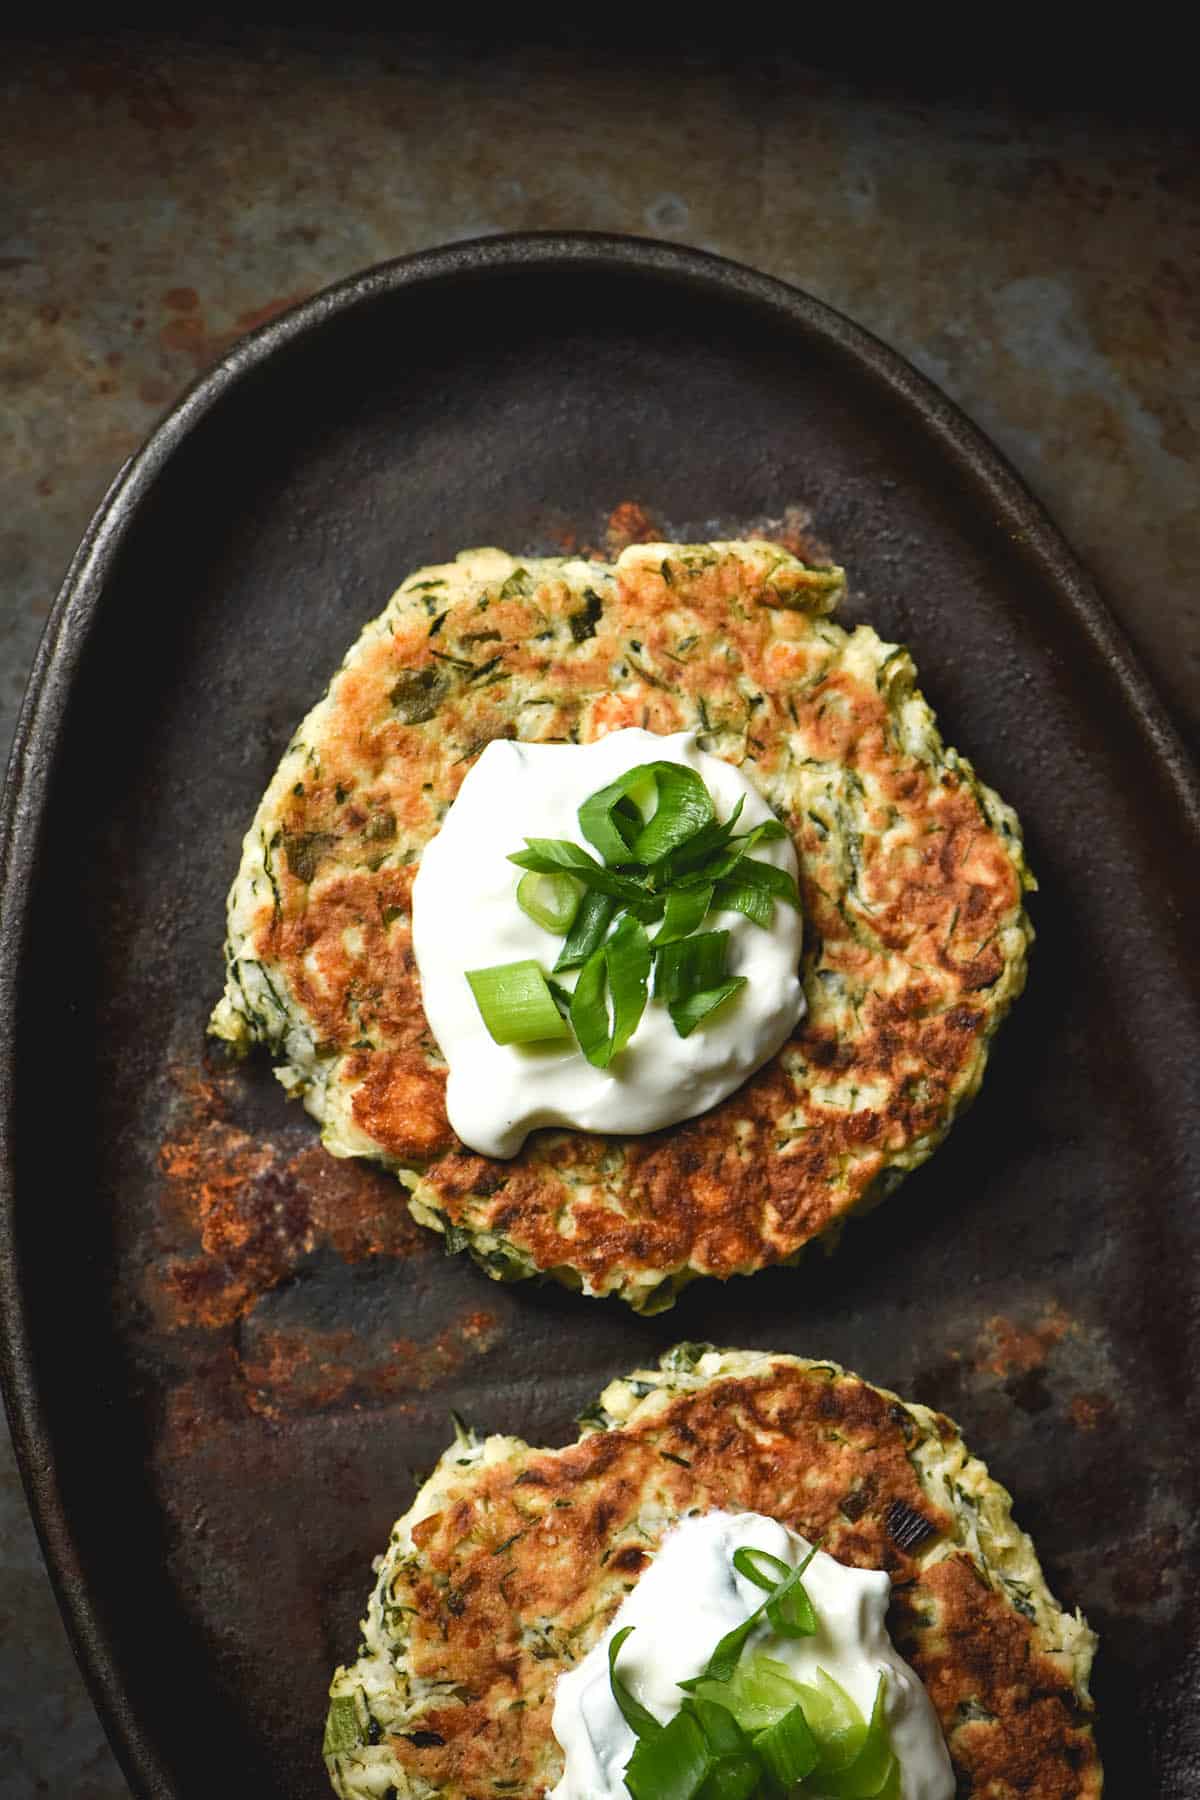 An aerial image of two gluten free zucchini fritters topped with a dollop of yoghurt and spring onion greens on a lightly rusted sizzle platter against a dark metal backdrop.